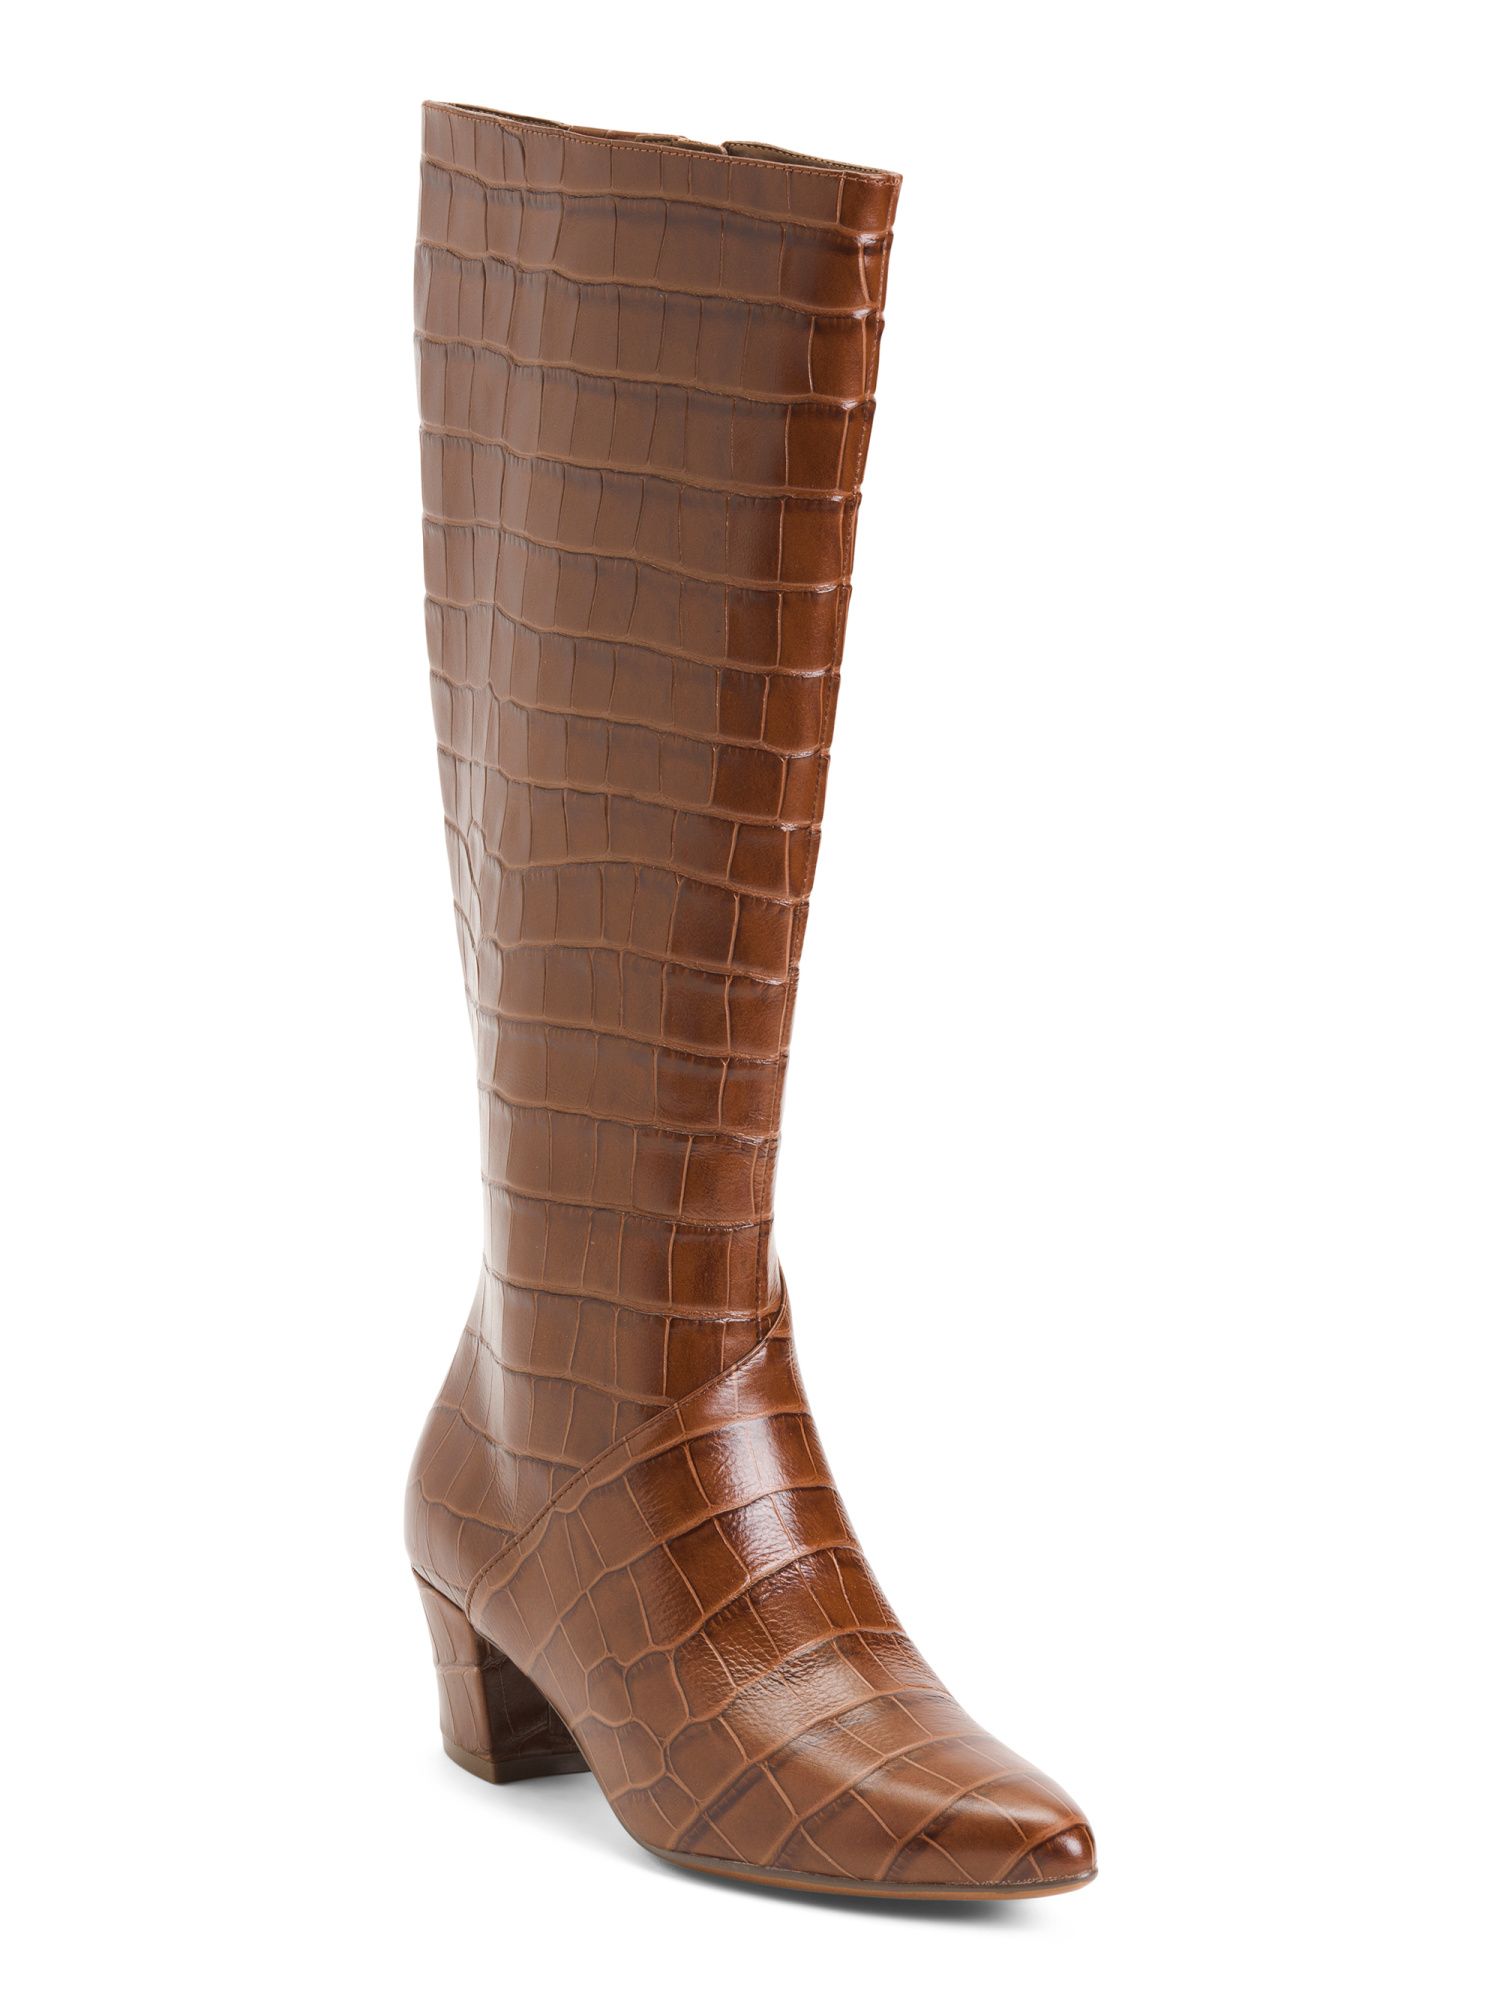 Leather Knee High Comfort Boots | TJ Maxx